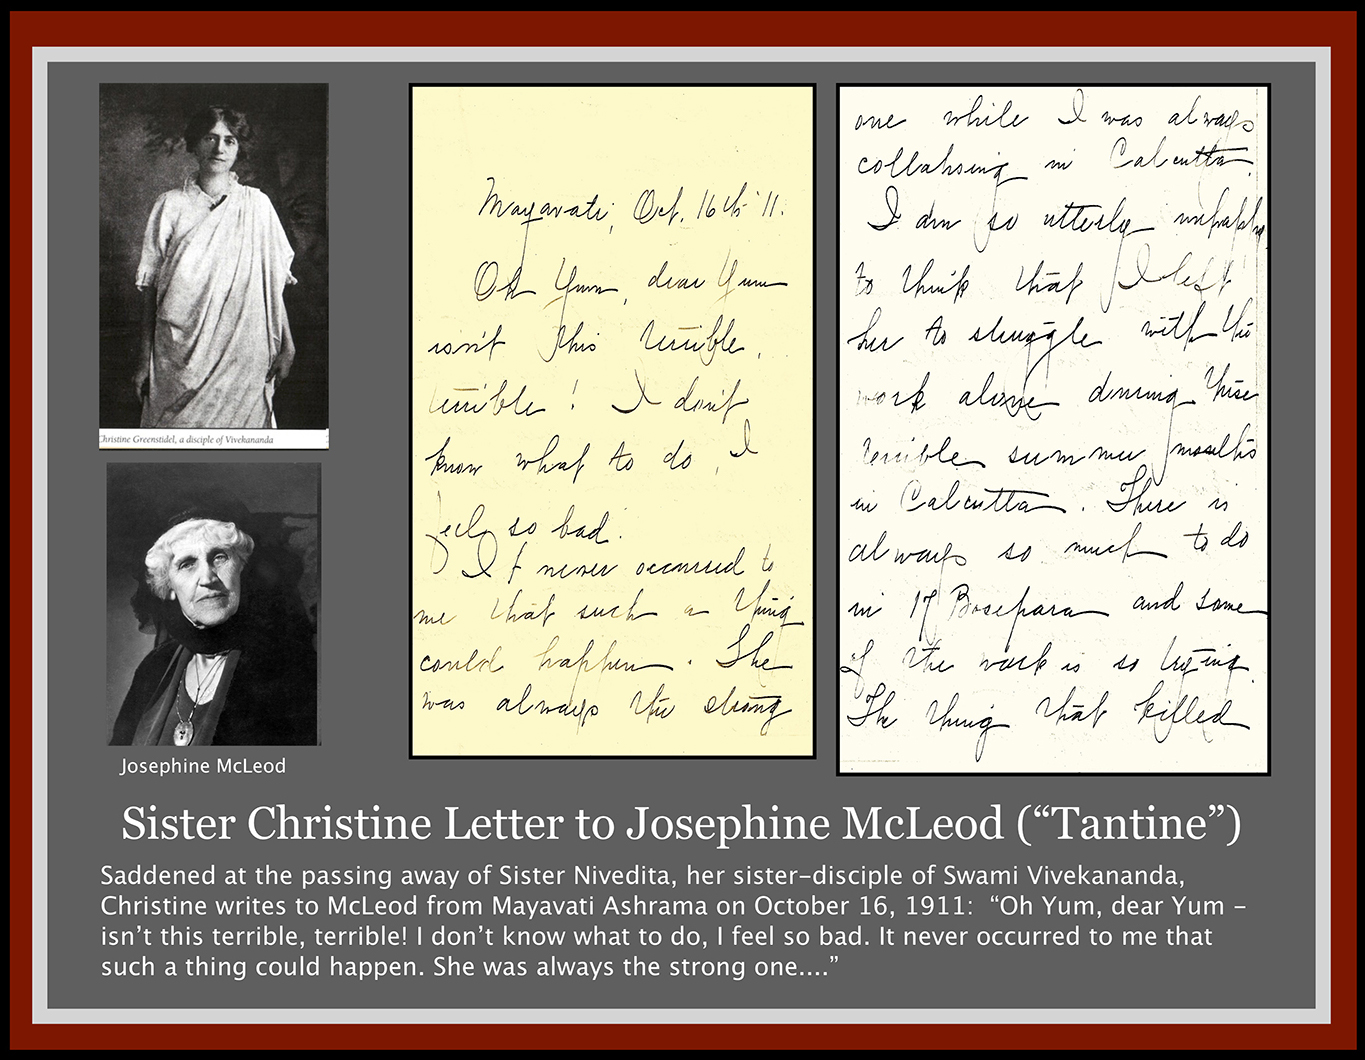 letter to Josephine McLeod from Sister Christine.